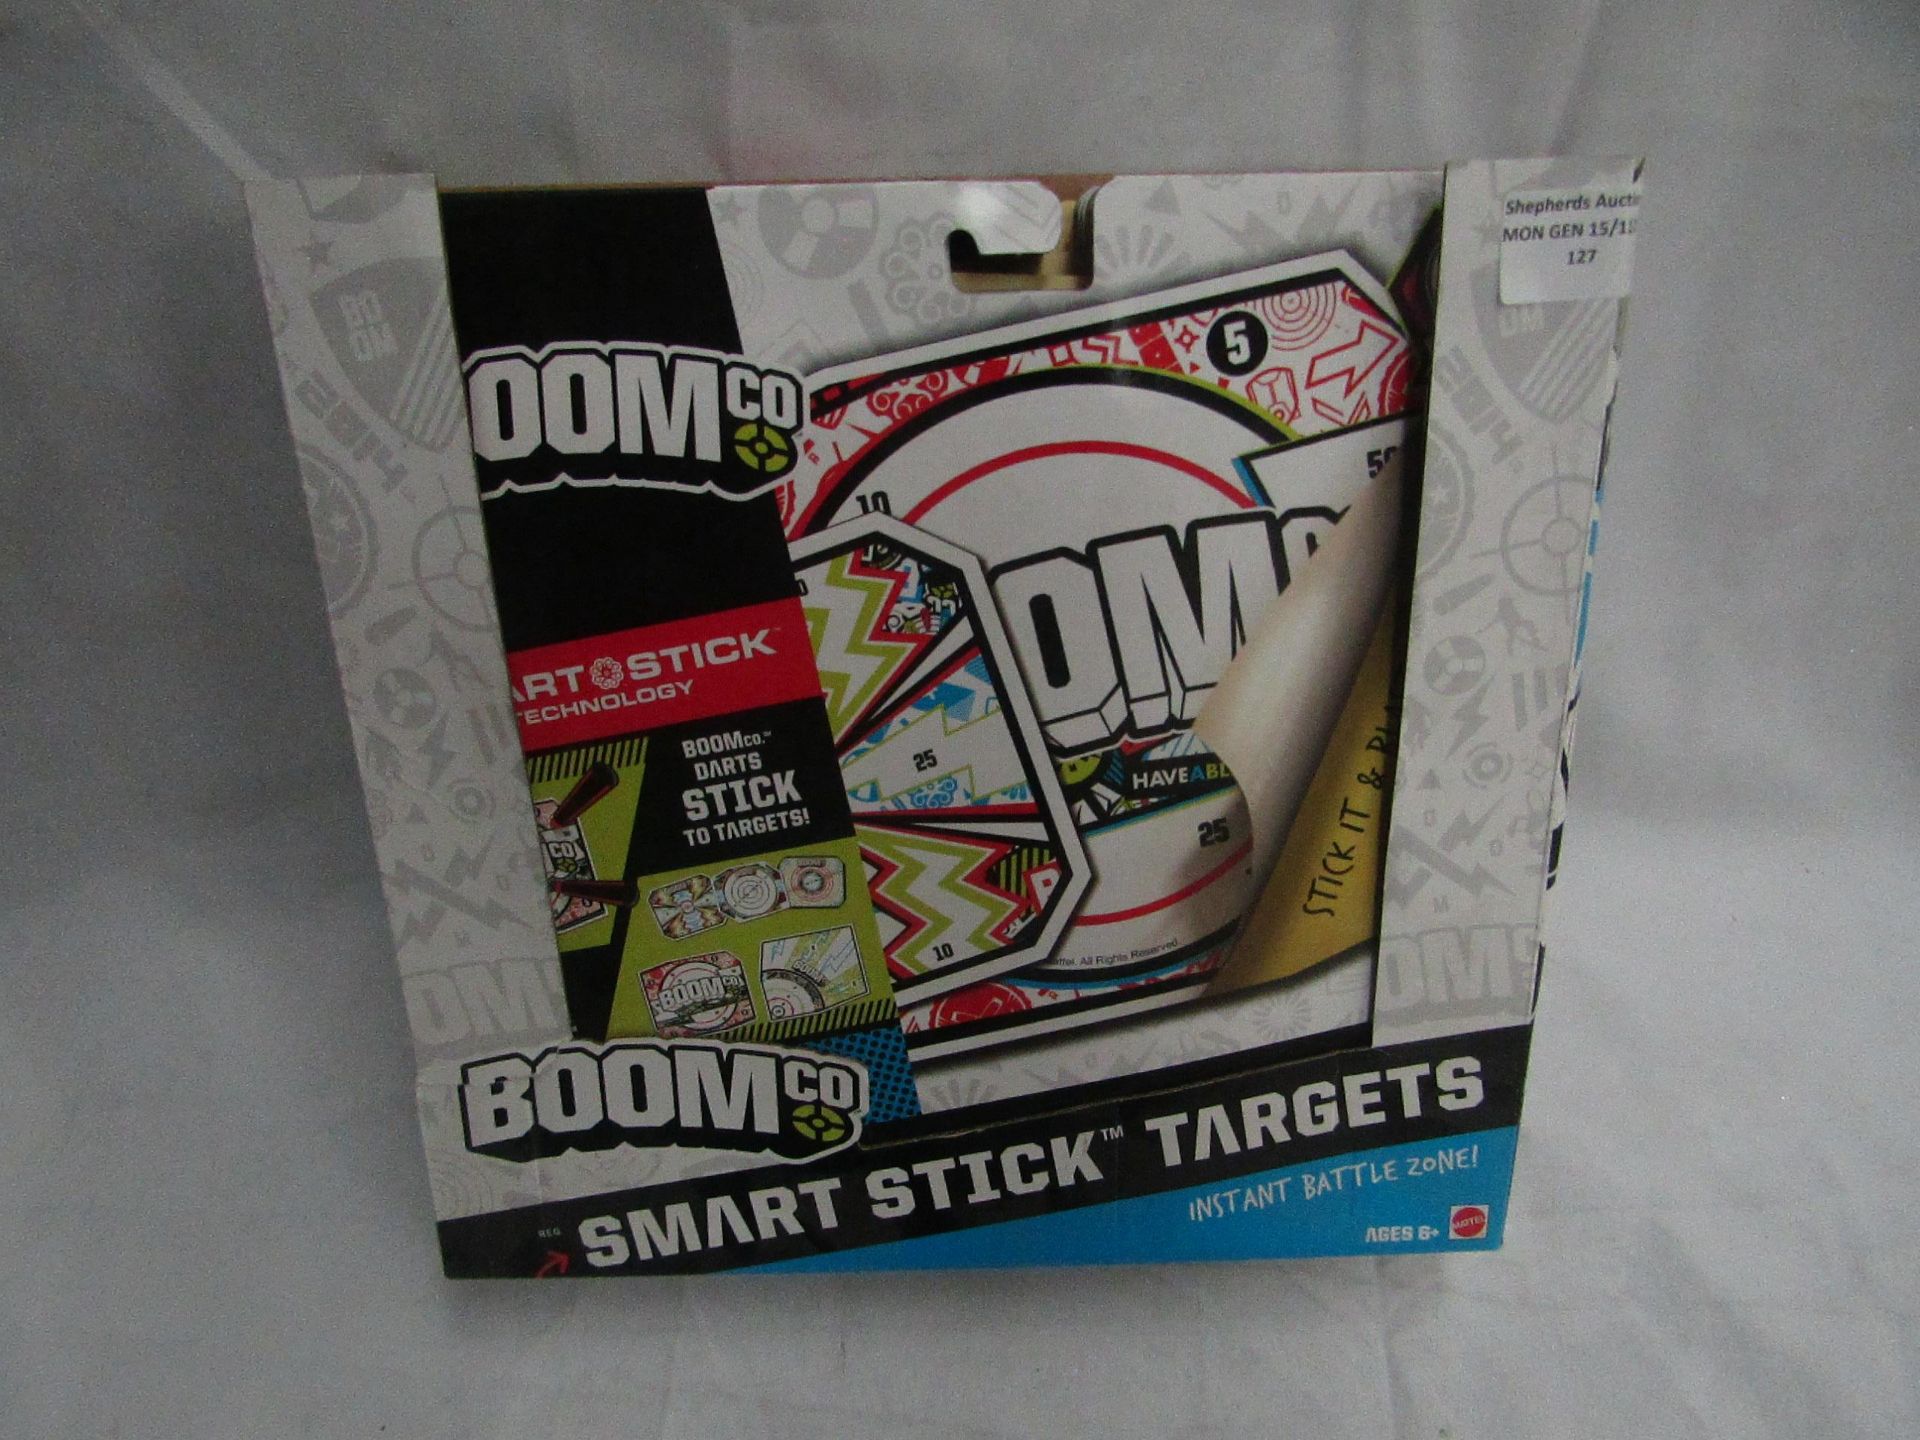 20x Boomco - Smart Stick Targets - New.